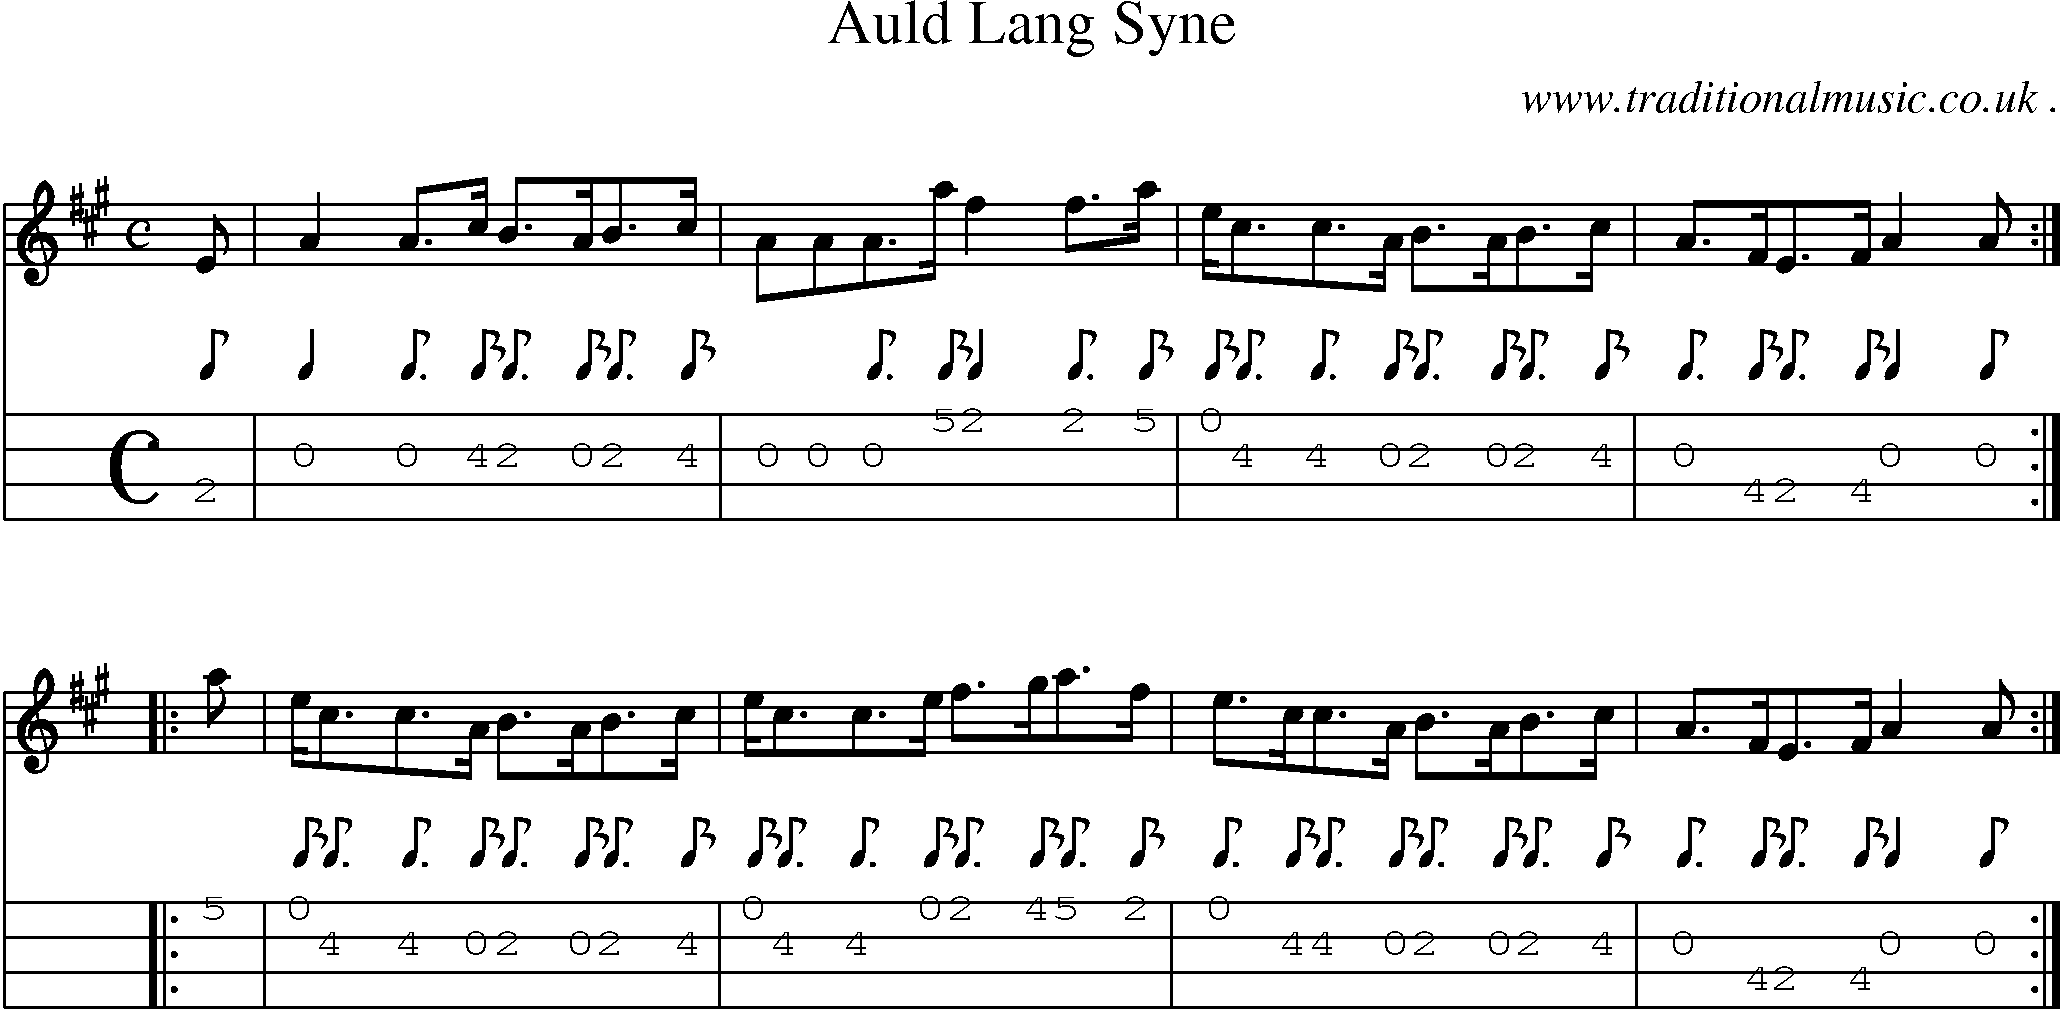 Sheet-music  score, Chords and Mandolin Tabs for Auld Lang Syne